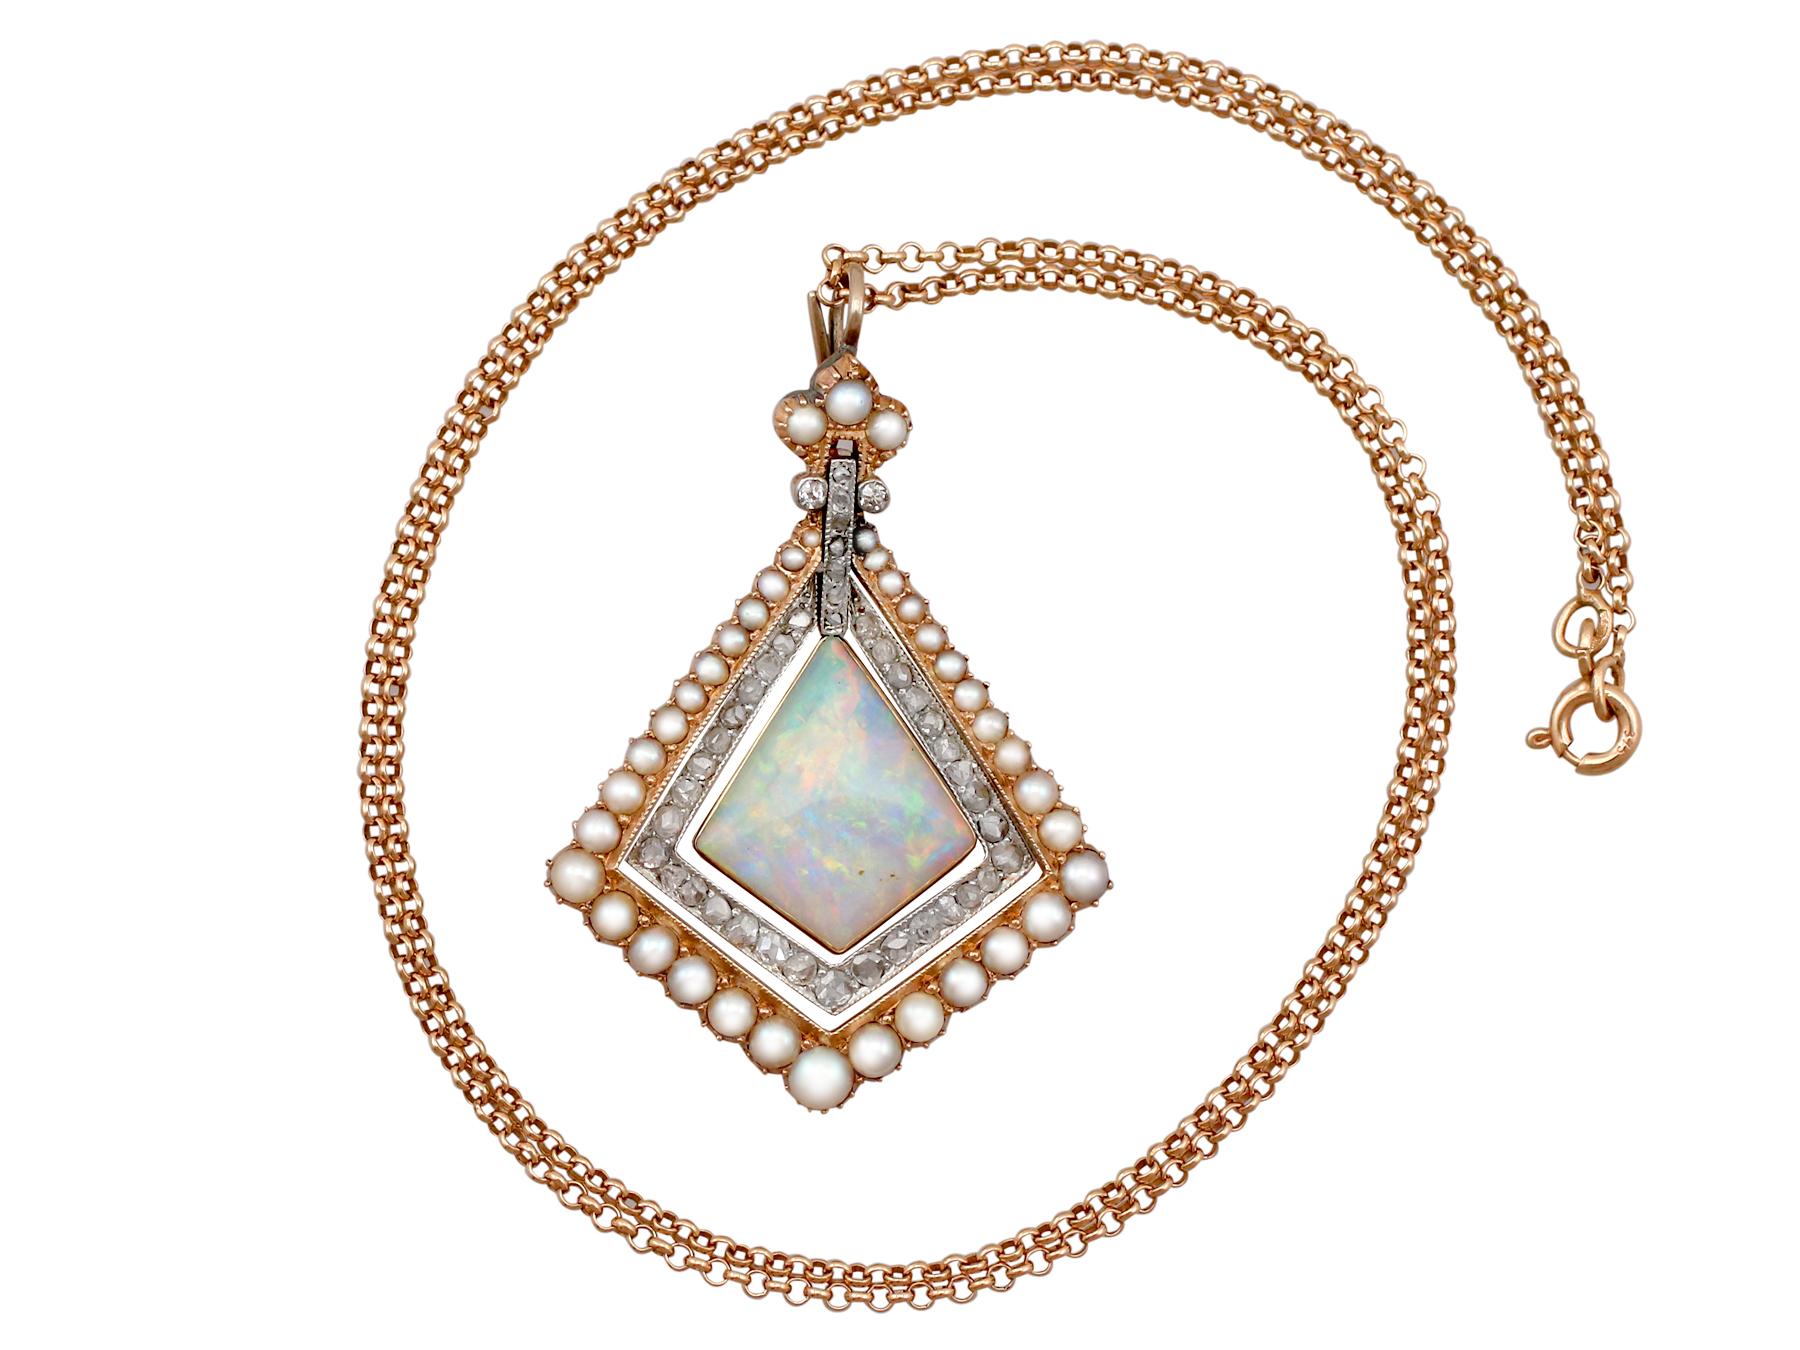 A stunning antique 2.88 carat opal and 0.84 carat diamond, seed pearl and 15 karat yellow and white gold pendant with 9 karat yellow gold chain; part of our diverse antique jewelry collections.

This stunning, fine and impressive pearl has been